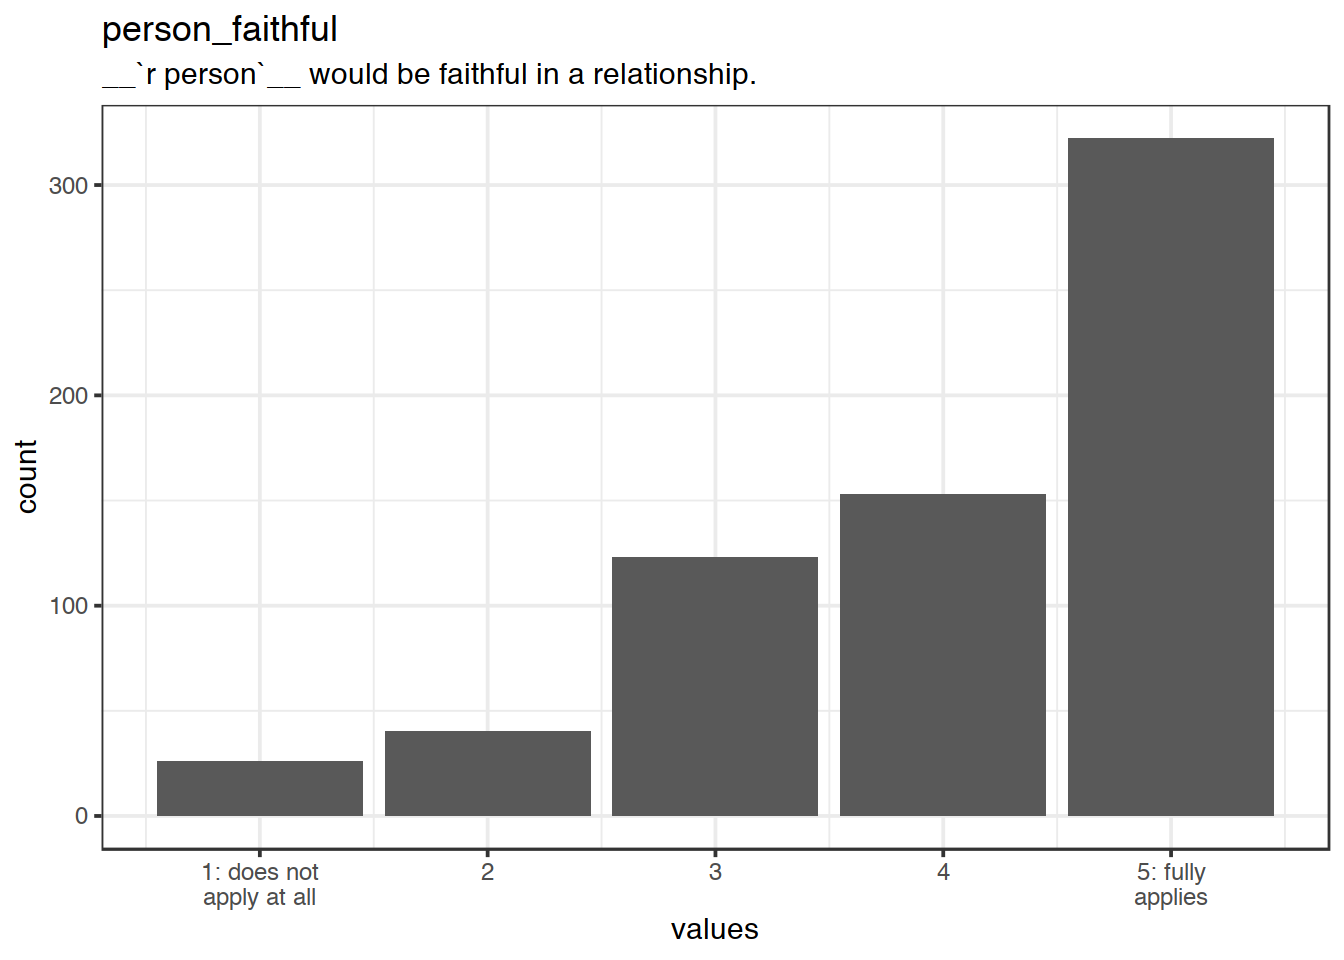 Distribution of values for person_faithful